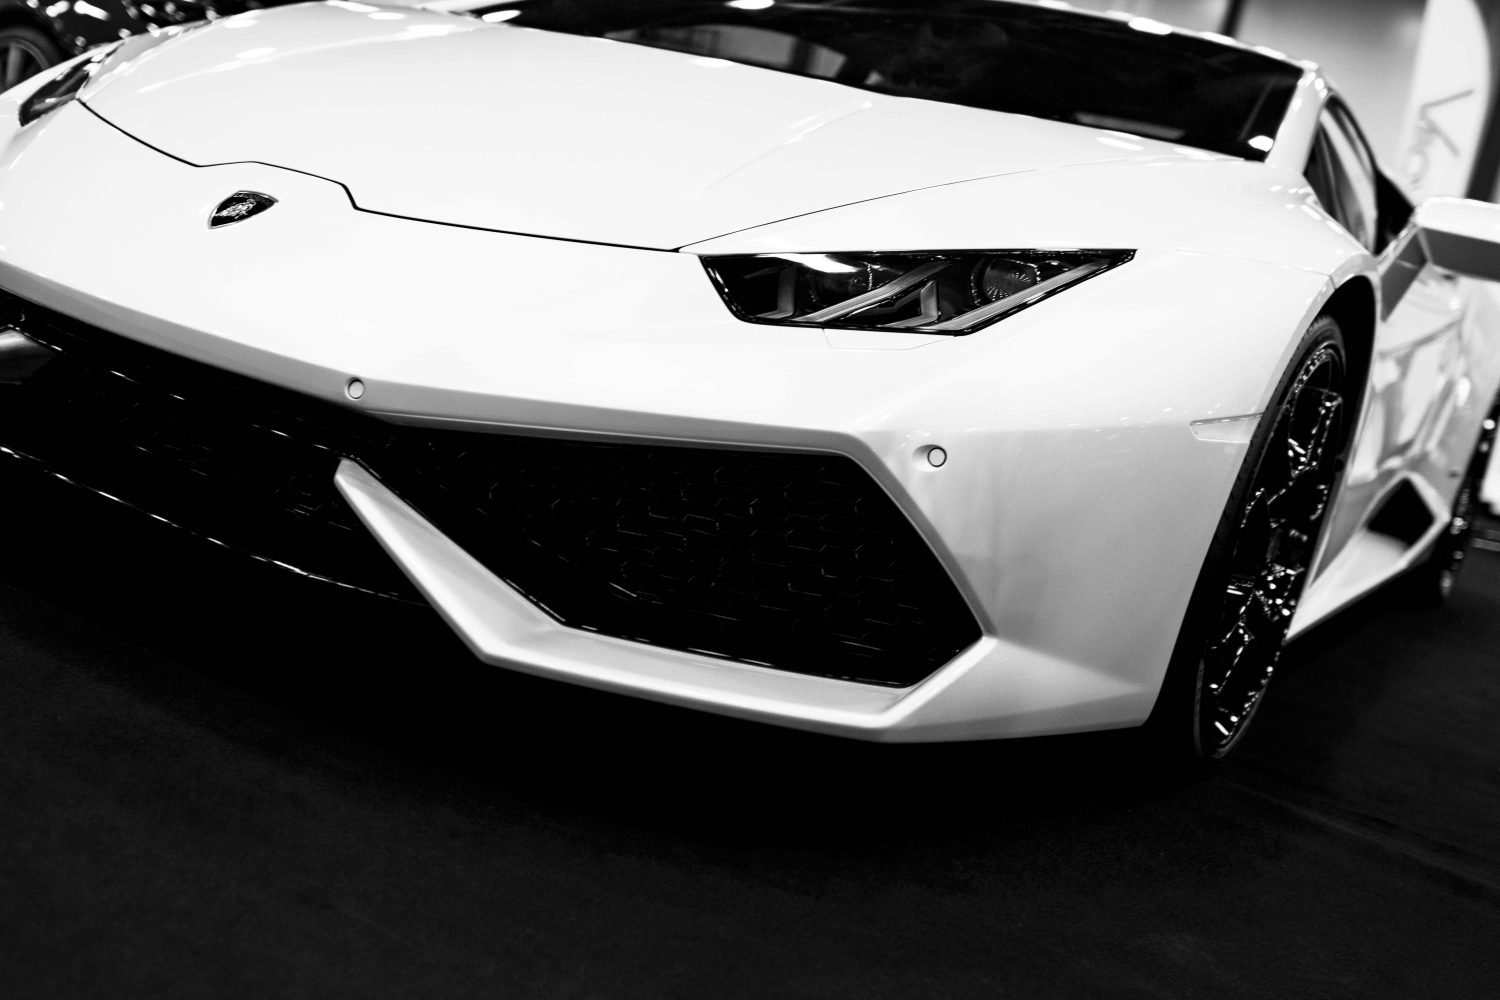 US Court Seizes Lambo And Crypto Millions From Dead Dark Web Kingpin